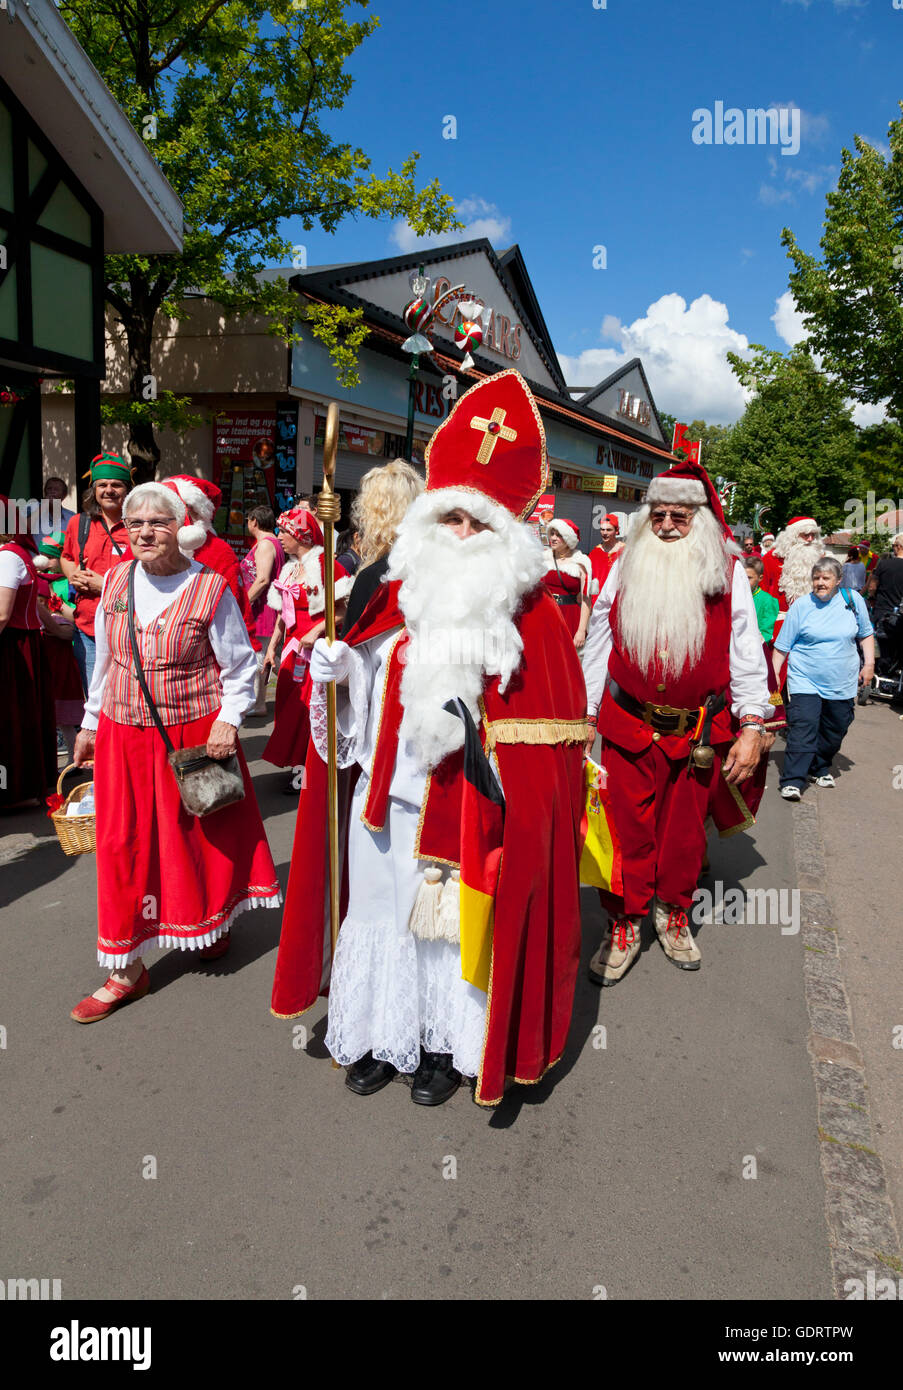 Klampenborg, Denmark. 20th July, 2016. Santas, elves and Santa’s wives parade between the competitions at the World Santa Claus Congress. For more than 50 years Santas from around the world have come to hold this 3-days congress at Bakken, the amusement park in the Deer Park just north of Copenhagen. The programme on this last day of congress includes a pentathlon in the summer heat among  Santas from more than ten countries, parades, entertainments, etc. The Santa with the crozier and the mitre-like hat is from Germany. Credit:  Niels Quist/Alamy Live News Stock Photo